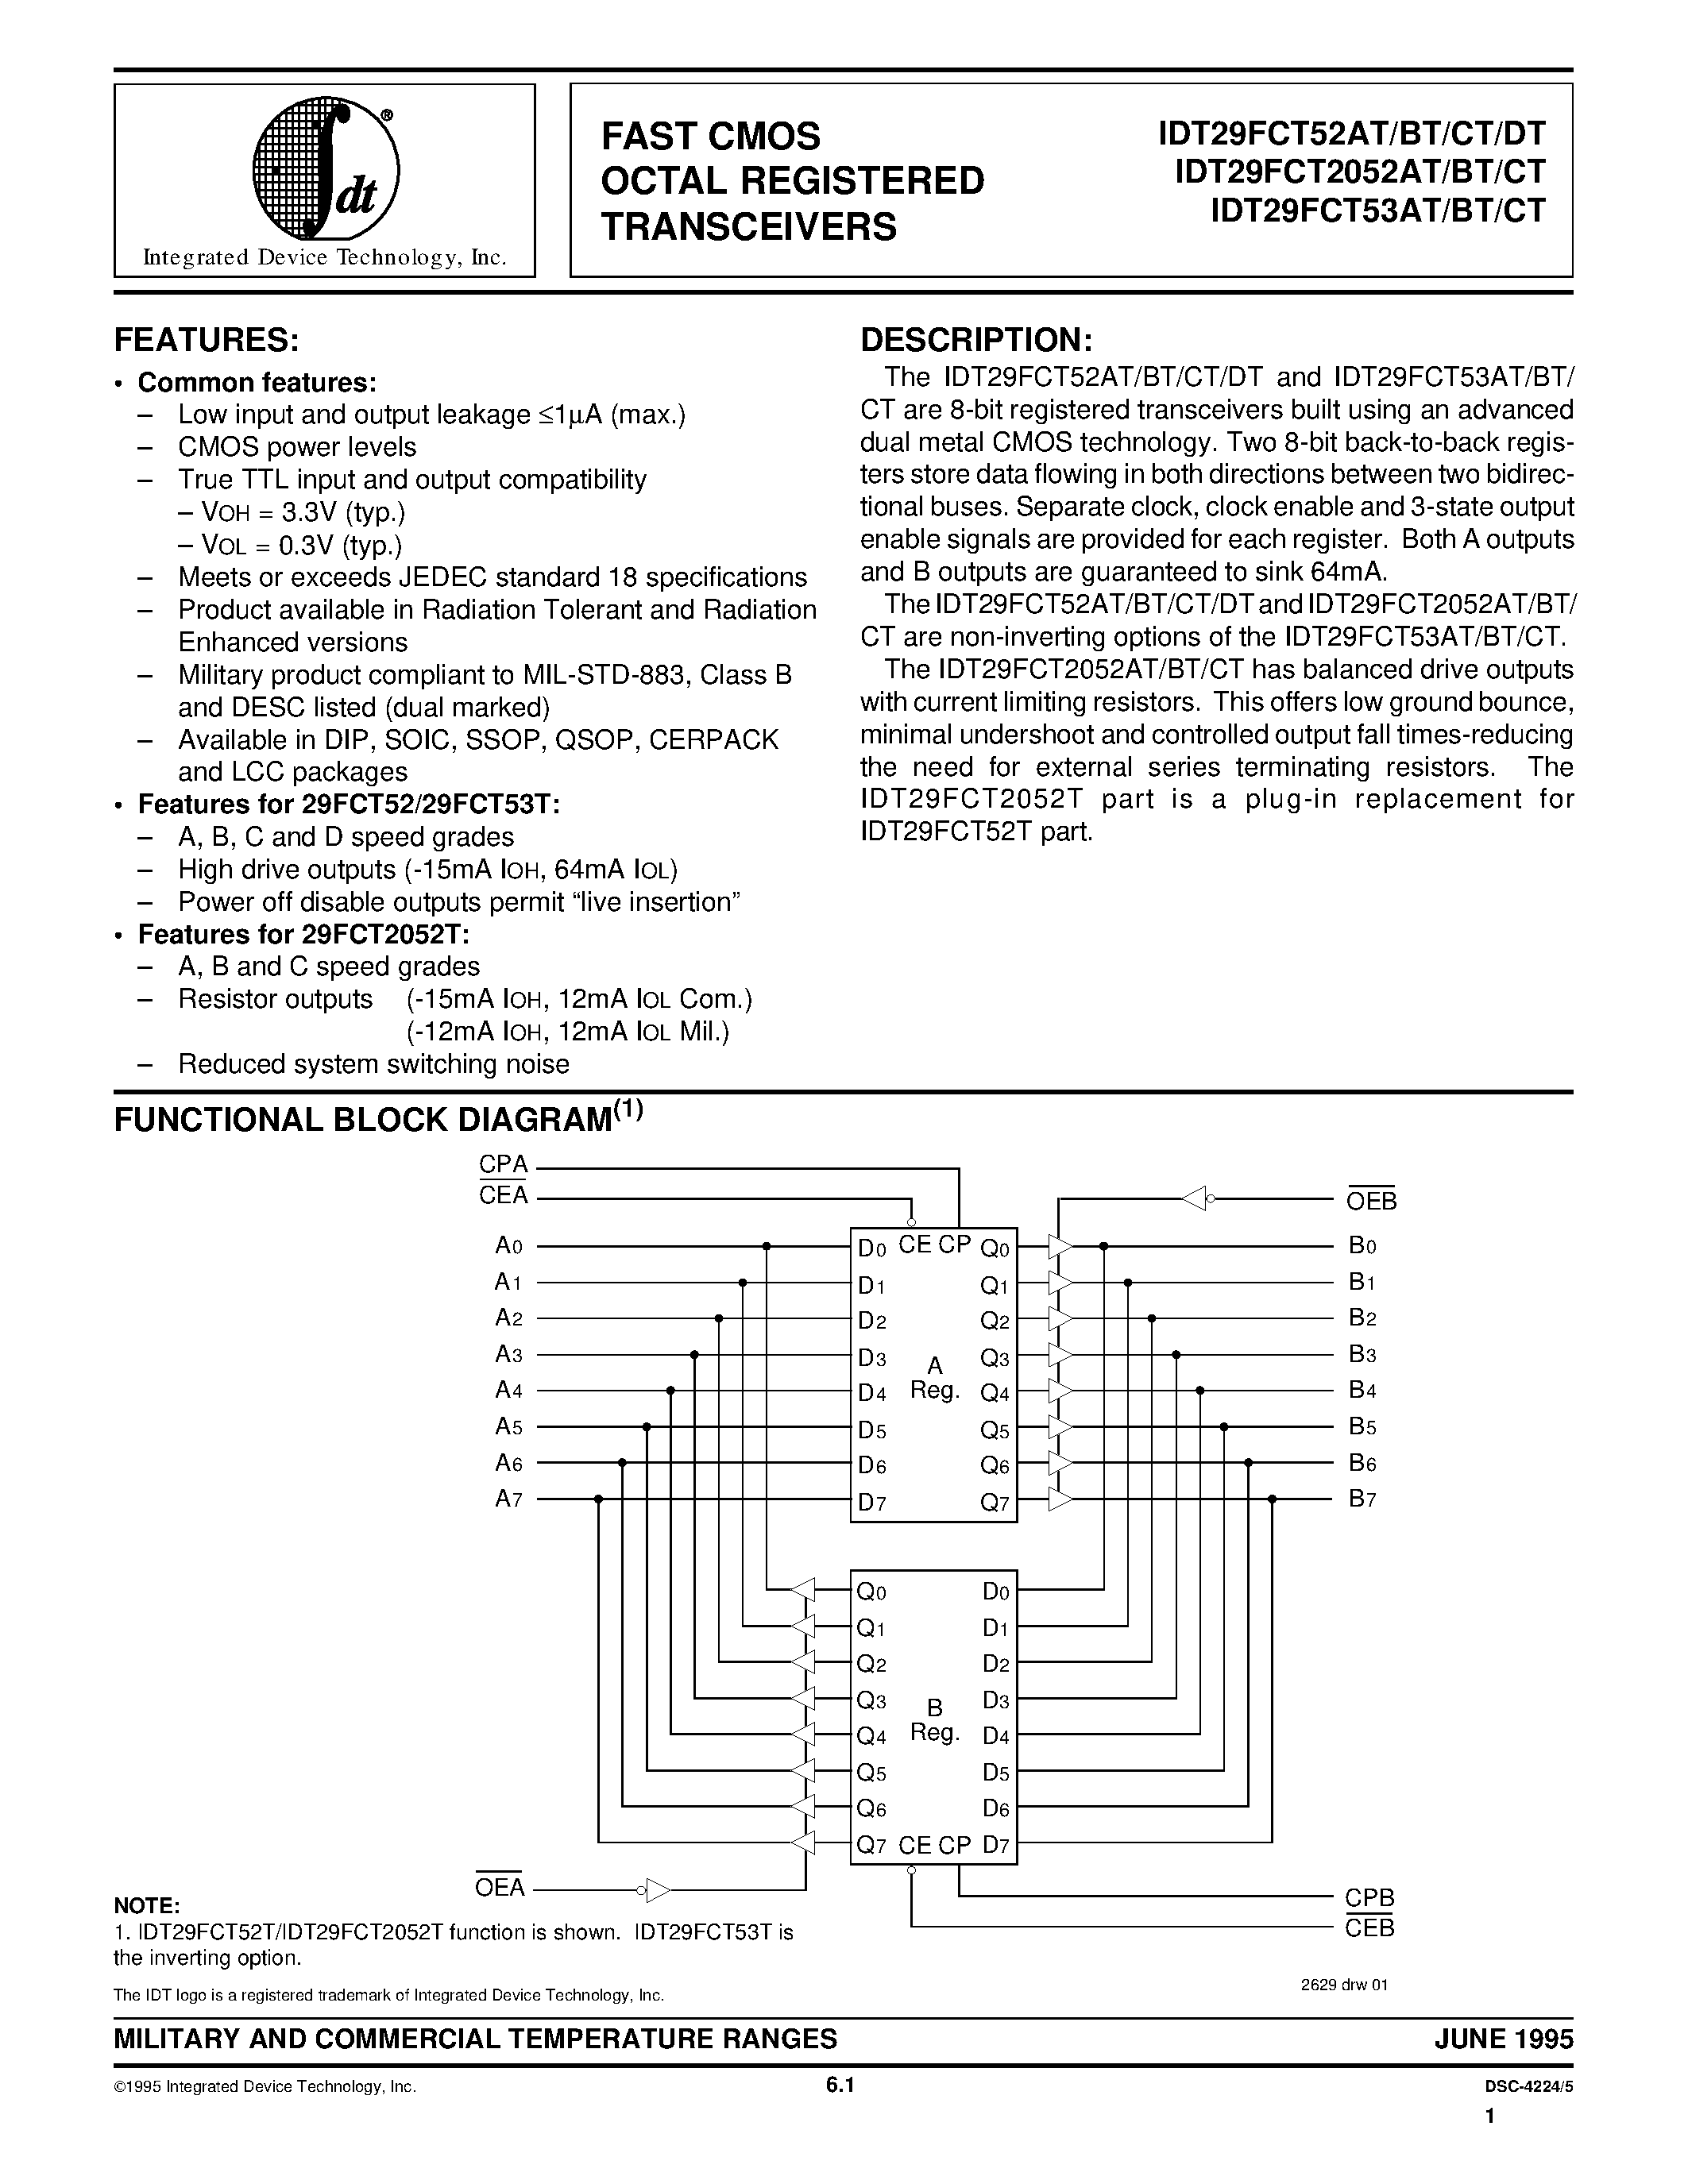 Datasheet 7429FCT53CTPYB - FAST CMOS OCTAL REGISTERED TRANSCEIVERS page 1